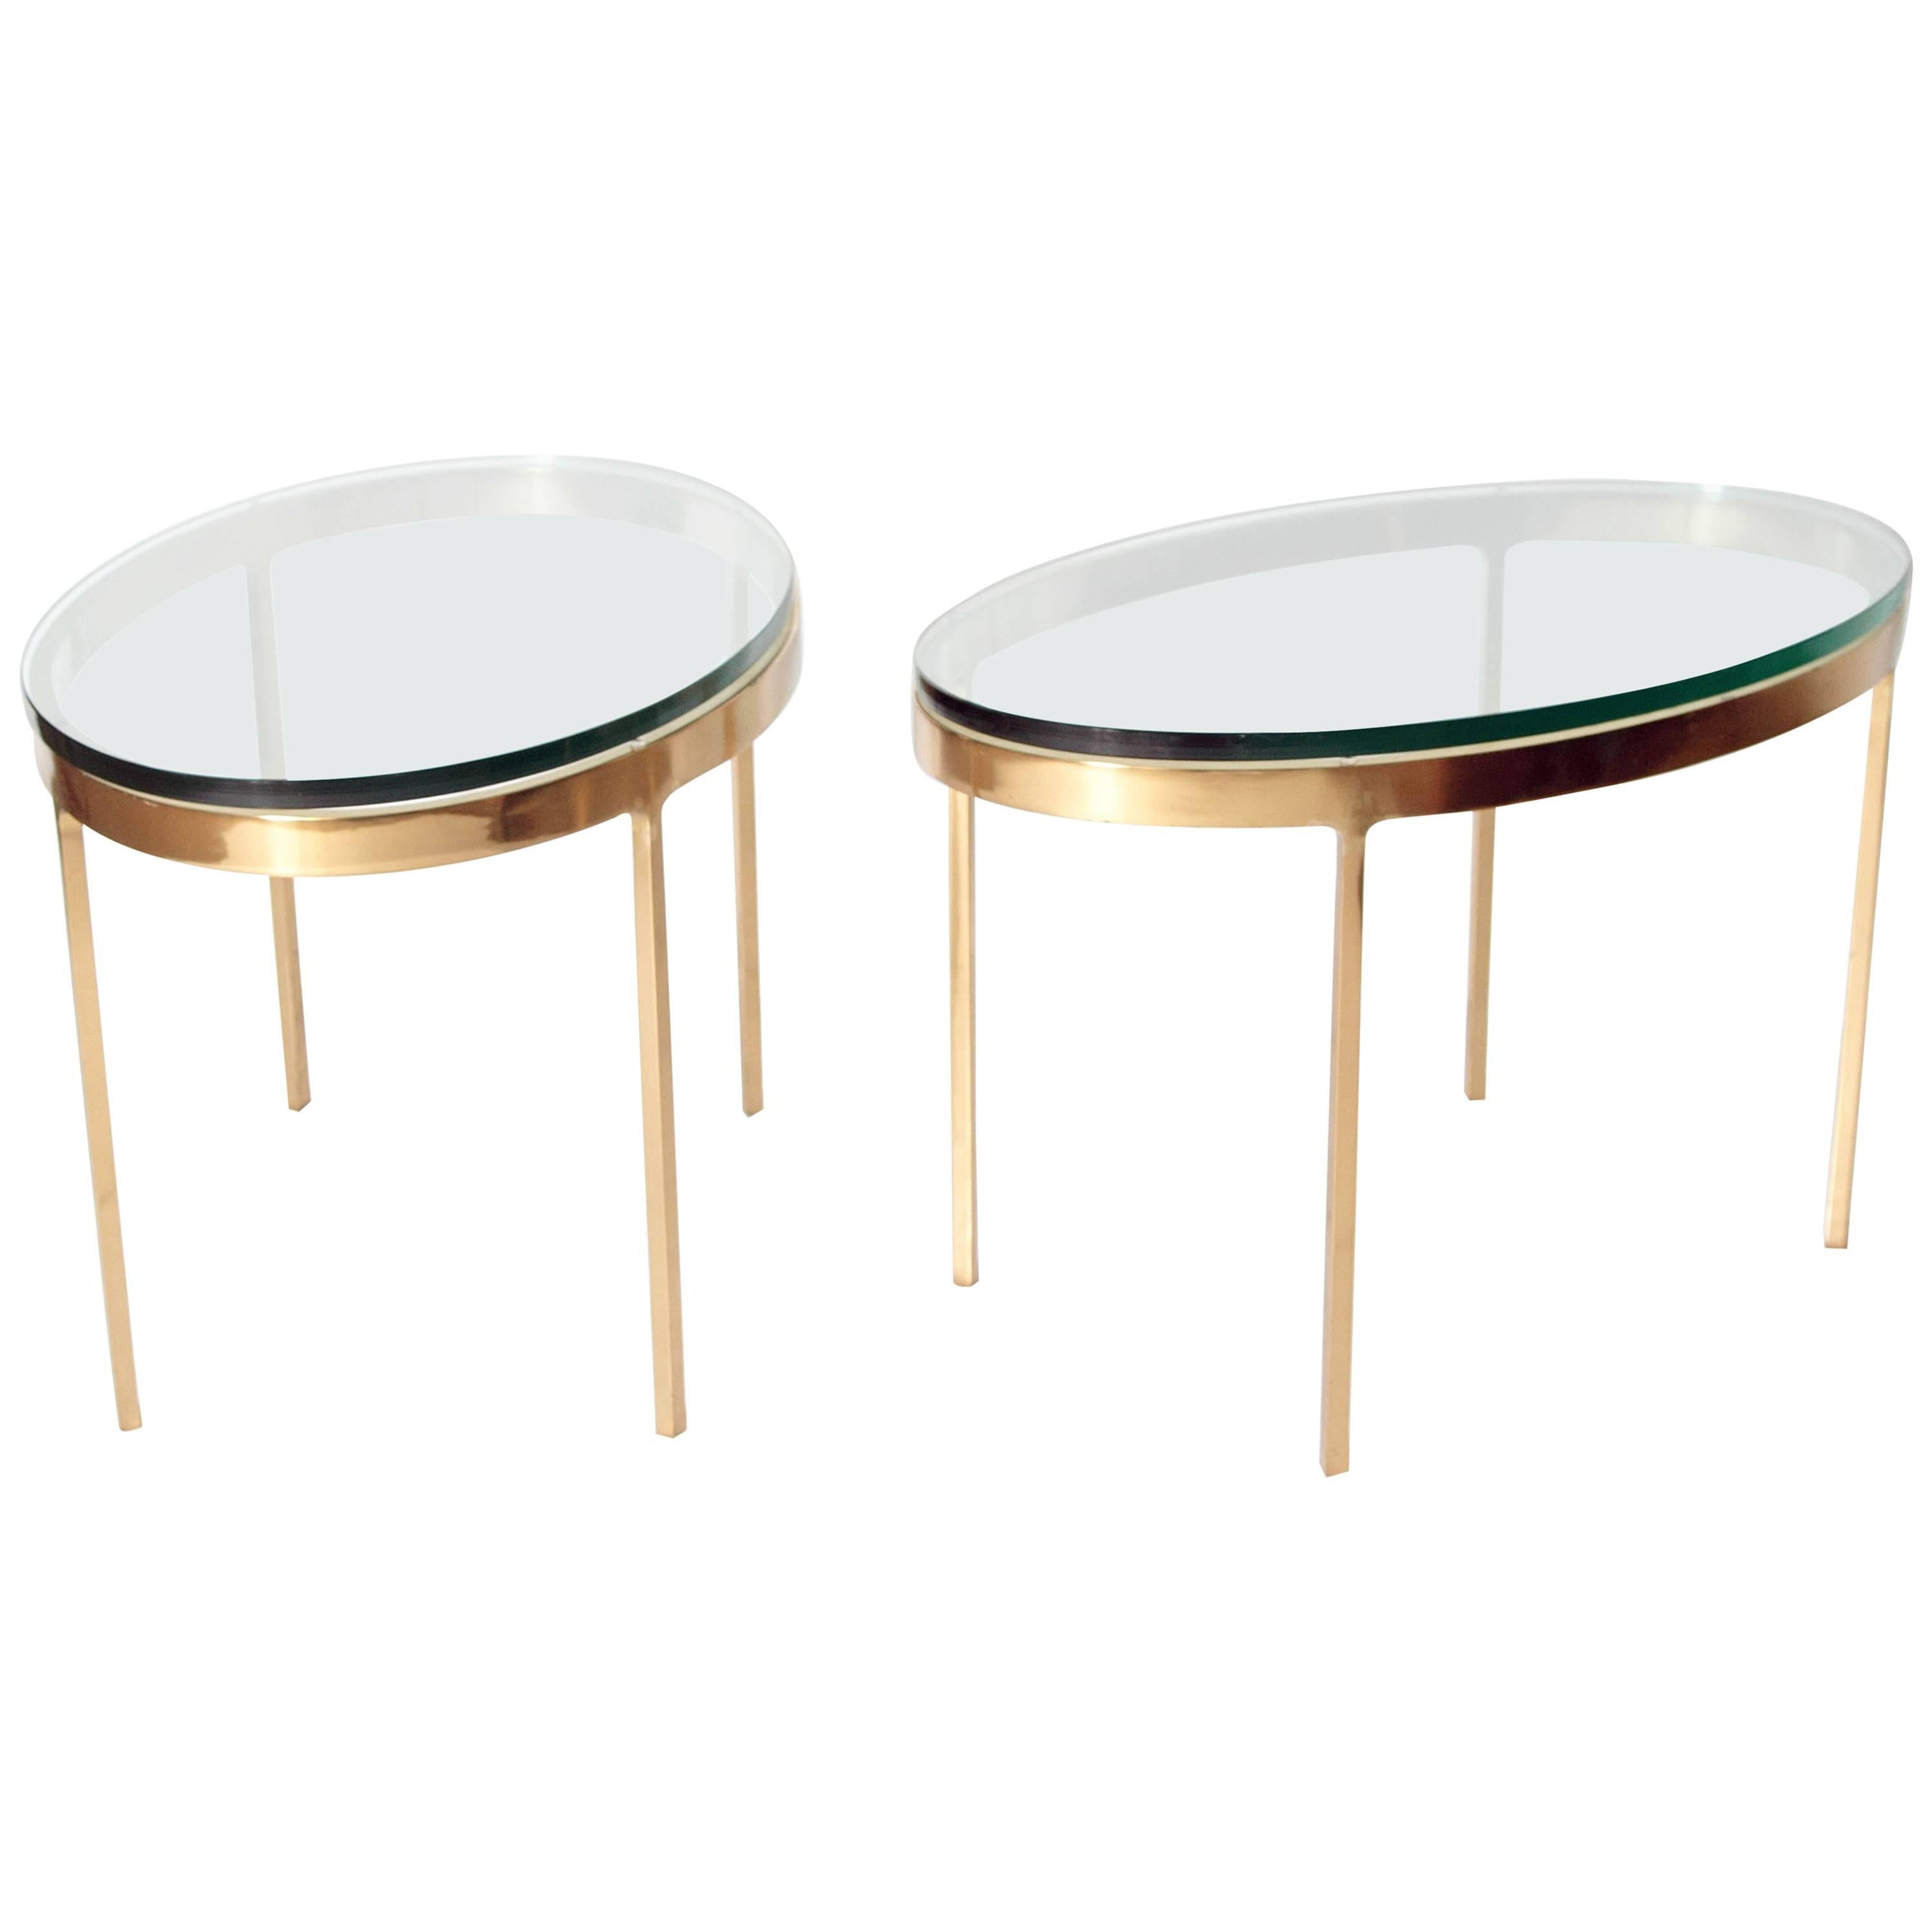 Oval Brass and Glass Tables by Nicos Zographos